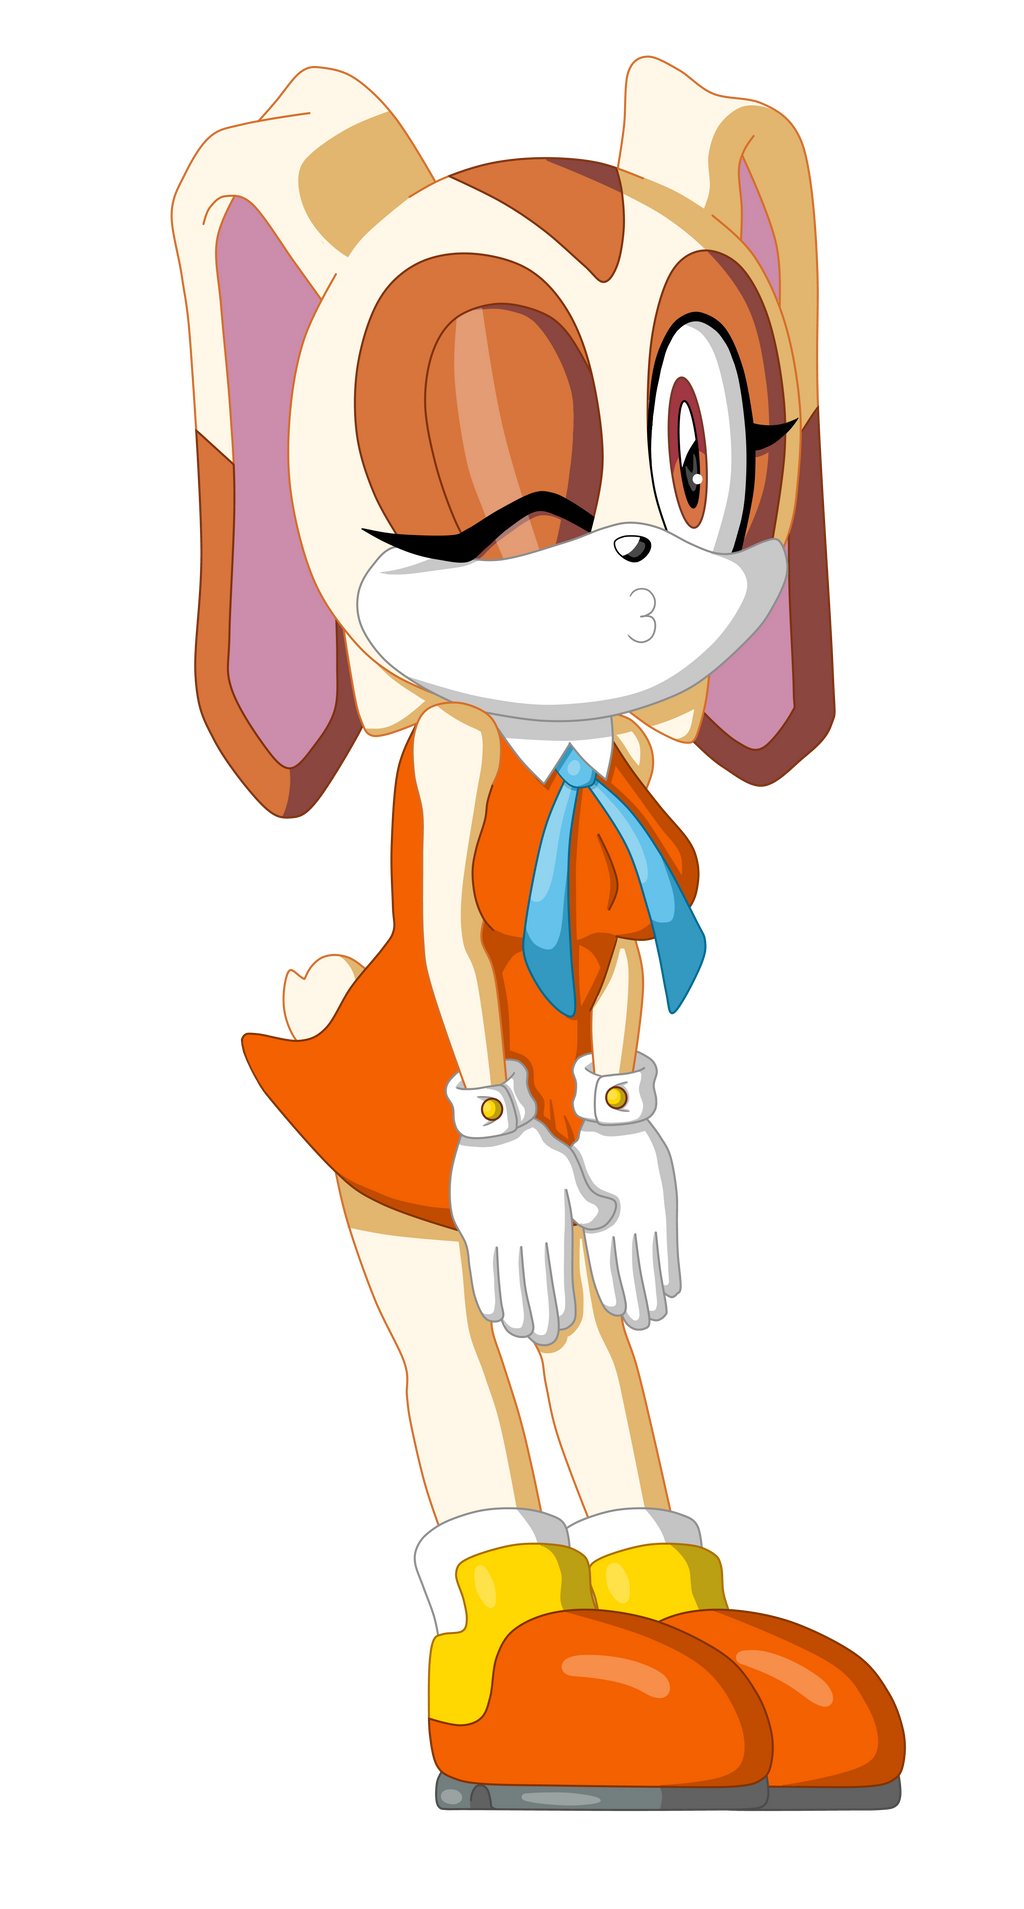 Commission: Cream is All Grown Up by sergeant16bit on DeviantArt